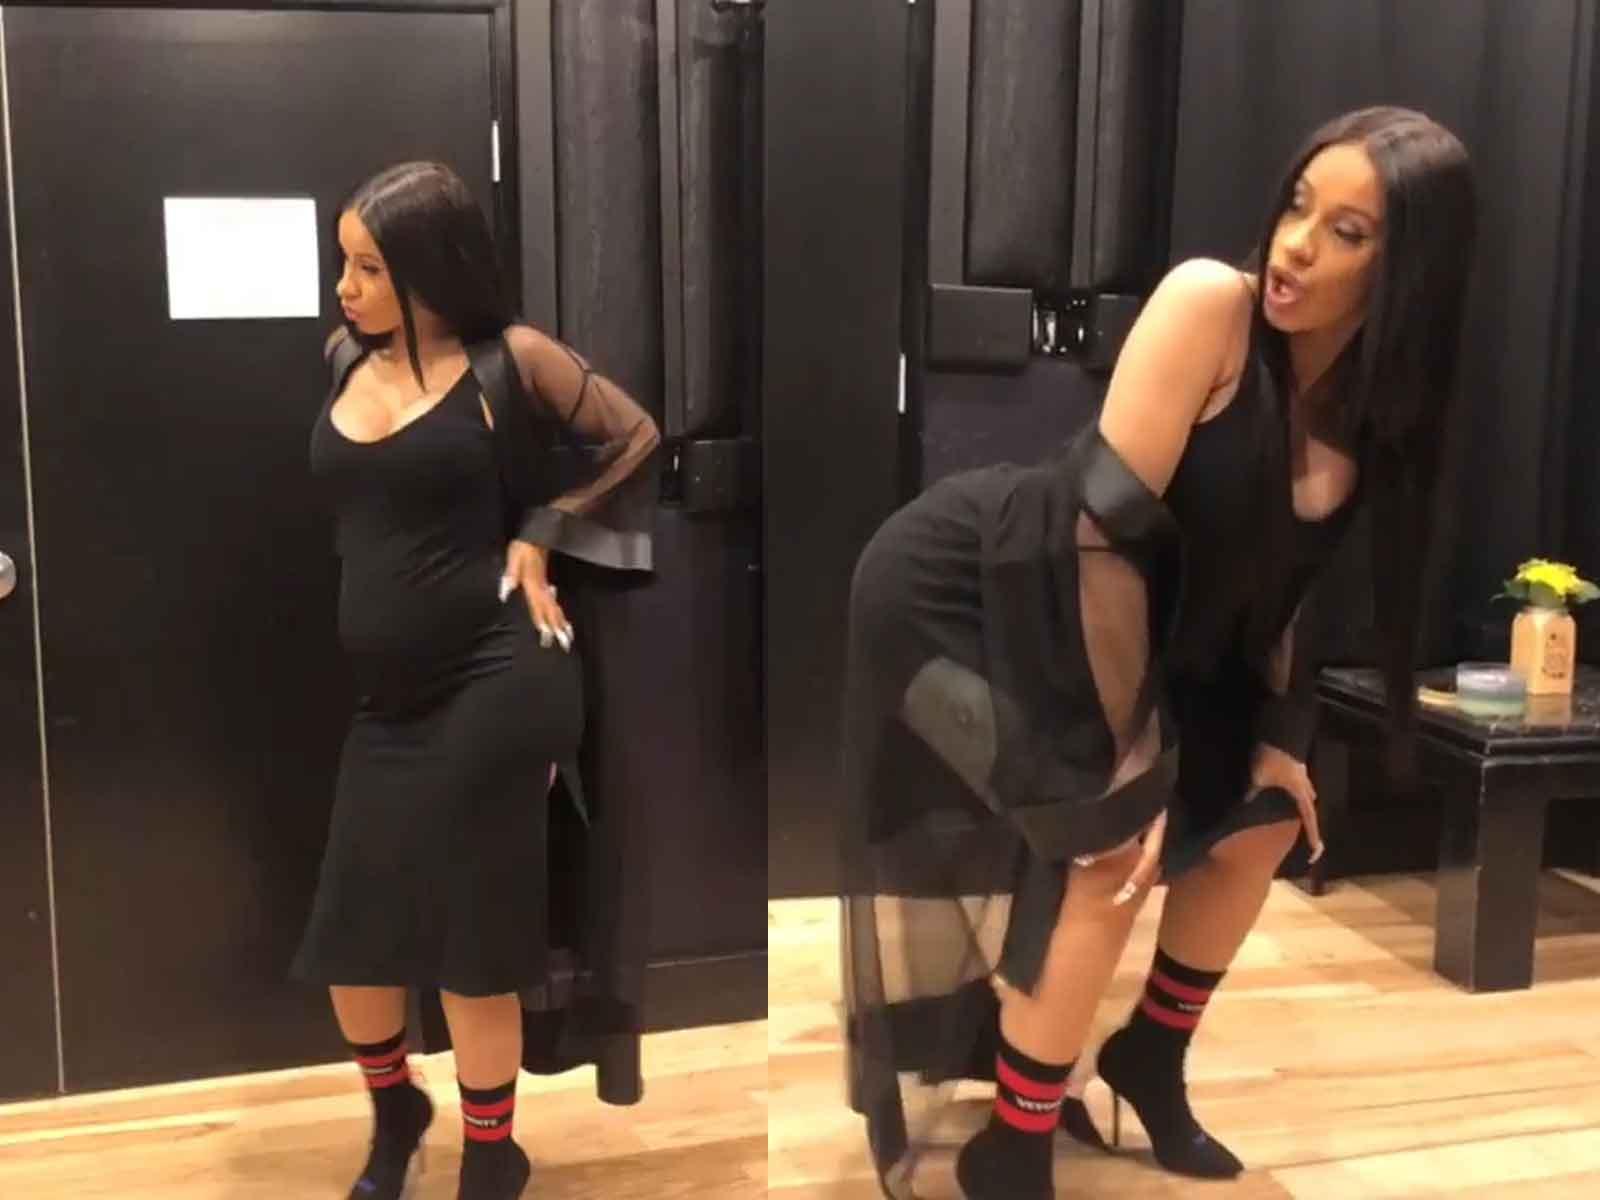 Cardi B Twerking While Pregnant Is Getting Us Ready for the Weekend!